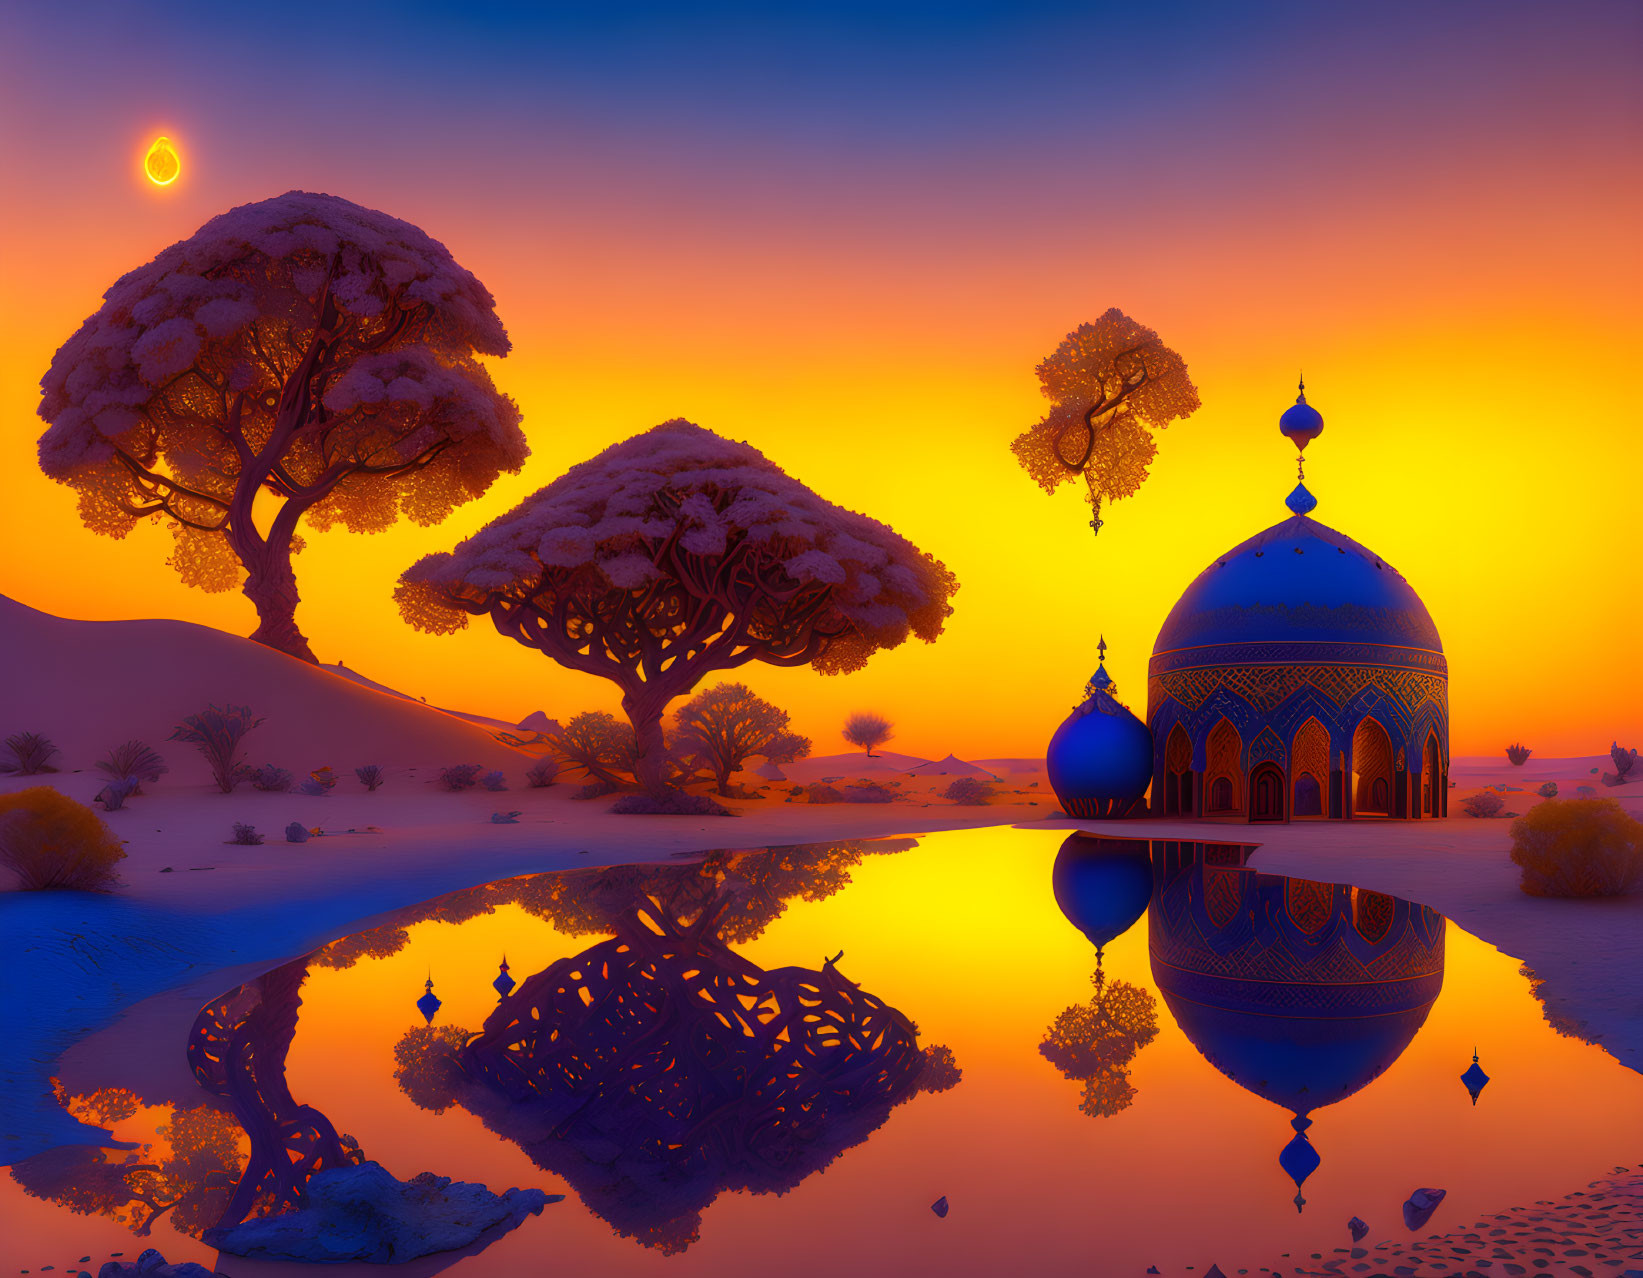 Surreal desert sunset with eclipse, oasis, mosque, and acacia trees